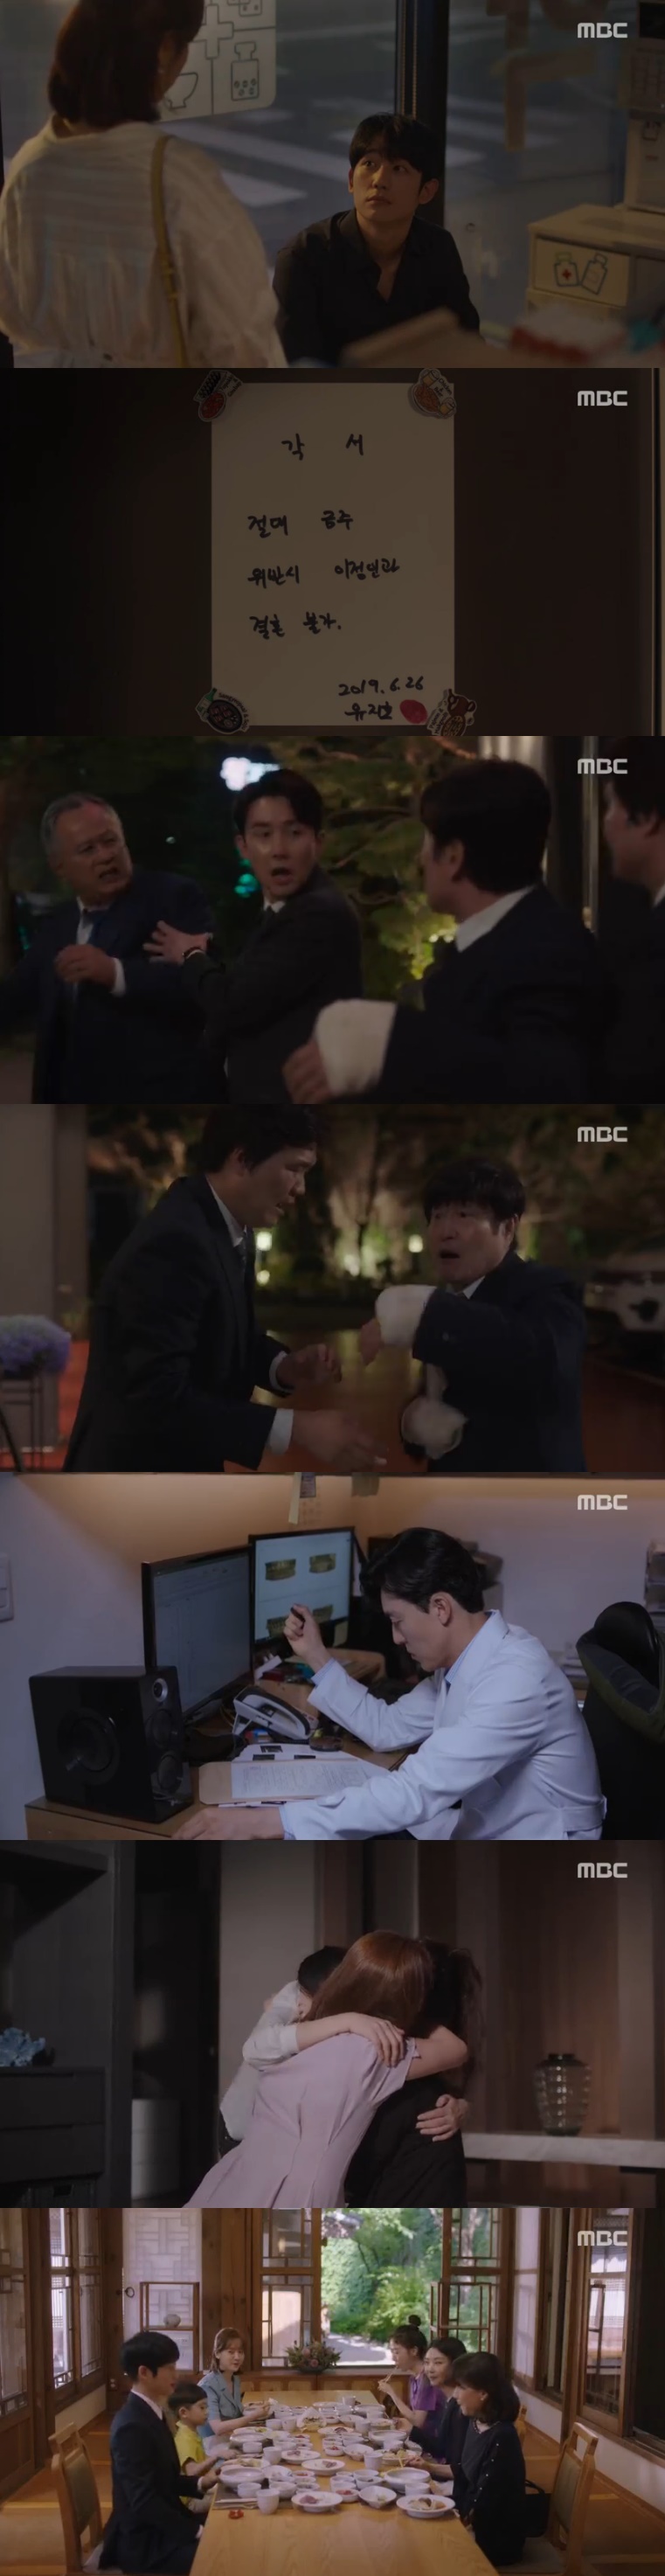 Spring Night Han Ji-min and Jung Hae-in welcomed Happy Ending.In the MBC drama Spring Night, which was broadcast on the afternoon of the 11th, Yoo JiHo (Jeong Hae-in) and Lee Jung-in (Han Ji-min) were depicted to share happy love.Yoo JiHo and Lee Jung-in sat in a pharmacy late at night and talked; Lee Chung-in said, Did you even think bad about Jung Eun-woo?Yoo JiHo said, You controlled me. Life. Action. Horse. Even thought. Ive been able to endure it.If you have never thought of it before, it is a lie. It will be hard to believe, but there is no emotion.Lee Choi Jung-in said, Good job, Jung Eun-woo, but Mr. JiHo himself would have wanted to comfort him.Thank you in Yoo JiHos Thank You, Choi Jung-in said, Thank you, I would have been sad, but I was comforted.Yoo JiHo, who went to Lee Jung-ins house, wrote a memorandum of abstinence in the words of Lee Choi Jung-in, Absolutely abstinence; I cannot marry Choi Jung-in in violation.Lee Tae-hak (Song Seung-hwan) said at a meal with Kwon Ki-seok (Kim Jun-ha) and Kwon Young-guk (Kim Chang-wan), Marriage should be decided by the party.Parents should support their childrens decisions. But Kwon Ki-seok pushed, Im going to get married this year. About autumn. After eating, Kwon Young-guk asked Lee Tae-hak, Do you think your daughter will marry? Lee Tae-hak avoided answering, Why do you do it after you finish the story?Kwon Yeong-guk sarcastically said, I cant believe your son or her daughter. I keep telling him to get married.Lee Tae-hak said, Model Behavior Choi Jung-in did not rush to do it.When Kwon Young-guk said, I have a conscience, Lee Tae-hak refuted, If the stone is shaken, it will not come out of dust. I will take a picture.Kwon Young-guk shouted, I want to try with me now. I swear my baby, but I can not go as I am. Lee Tae-hak also said, Lets take the class.Kwon Ki-seok took the drunken Lee Tae-hak home. Kwon Ki-seok told Shin Hyung-sun (Gil Hae-yeon): Choi Jung-in should not meet Yoo JiHo.I took a picture and came to the company and threatened me. My mom wants to see it, Lee Choi Jung-in told Yoo JiHo. Yoo JiHo, who suggested, Ill see Jung Eun-woo too.When Yoo Nam-soo (Oman-seok) and Ko Sook-hee (Kim Jung-young) worried, Yoo JiHo persuaded me that I have Jung Eun-woo to see all of me.Choi Hyun-soo (played by Lim Hyun-soo) spoke in front of the company elevator saying, Im getting married next to Yoo JiHo.Kwon Ki-seok heard this, and I learned that Shin Hyung-sun and Yoo JiHo had a meal place.Before having a meal, Choi Jung-in, who went to the Seo-yool Lee (Lim Sung-eon), heard from Lee Jae-in (Lee Min-kyung) that Nam Si-hoon (Lee Mu-saeng) hit the Seo-yool Lee.Lee Jung-in comforted the Seo-yool Lee in tears.Six people at a Korean restaurant had dinner together, including Yoo JiHo, Choi Jung-in, Shin Hyung-sun, Seo-in, Lee Jae-in and Yoo Jung Eun-wooI came here because I wanted to learn, said Seo-yool Lee, who will become a single mother. Yoo JiHo showed humility, My parents have raised it all.The Sea-yool Leein then asked, I want to ask you one thing: what kind of heart you endured.Yoo JiHo said, My parents raised them all, but Jung Eun-woo is my child. I only looked at one thing.Choi Jung-in looked at me only, but I have to protect it no matter what. The new line and Choi Jung-in wiped away tears.Im impressed, Im a parent, said Shin. Seo-young Lee also gave a warm atmosphere by saying thank you.Choi Jung-in advises that Father has a long way to go, said Choi Jung-in, I will get through it. I will wait as long as I can.I will have something I will regret, something I will not think about in the future. And I am okay with Mr. JiHo.They held hands and showed a strong love.In the car that came back from the meal, Yoo Eun-woo asked, Are you married to Mr. Father? Is he my mother?Youre going to be a Jung Eun-woo mother, replied Lee Jung-in, who said, Ill do well.Lee Choi Jung-in smiled, saying, No, we will do well.The next day, Kwon Yeong-guk offered Lee a board position. Lee Tae-hak delayed the reply, saying, I should think about it.Lee called Lee Jung-in and asked, Are you a quack and not really?I know youre going to be more snowy than living in a brilliant way, Ill show you how you live happily. Believe me, Lee said.Lee refused to move to the board of directors in response to Choi Jung-in, who told Kwon Ki-seok, Gi Seok did enough for you.Kwon sent an apology to Lee Chung-in, saying, Im sorry. Kwon looked at the line and went out looking for a new relationship.Yoo JiHo lied to Choi Jung-in about sleeping and drank with Choi Hyun-soo Park Young-jae (Lee Chang-hoon) all night watching soccer.The next morning, Choi Jung-in came to Yoo JiHos house and was angry at the sight, because he broke the memorandum this week.But soon this Choi Jung-in was angry at the charm of Yoo JiHos boat hurts.Yi Jung-in found Yoo JiHos home; Yu Nam-soo and Yoo JiHo were brought closer by drinking.Lee Choi Jung-in told Yoo Nam-soo and Ko Sook-hee, I know youre worried. I wish you were less. Ill be pretty with each other.I will do my best as much as I can to Jung Eun-woo The next morning, Yi Jung-in took place at the Yoo JiHo home; Yoo JiHo had Yi Jung-in write a memorandum of abstinence.Lee Jung-in turned away, saying the stomach hurts and the two laughed together; Yoo JiHos ban on lying was changed to a memorandum of no lies.Yoo JiHo sent a message to Lee Choi Jung-in saying, Thank you for coming to me.Lee Choi Jung-in replied: One spring brought Mr JiHo.One rainy day, Choi Jung-in stopped by the pharmacy and told Yoo JiHo, Give me some medicine to break the pharmacists drink. Yoo JiHo said, Ill give you some medicine.I do not care about the woman who brought my wallet. The two of them made love while kissing at the pharmacy.On the other hand, Spring Night is a romance drama about the process of loving two people who accidentally encountered each other in a pharmacy in spring.Photo  MBC Broadcasting Screen